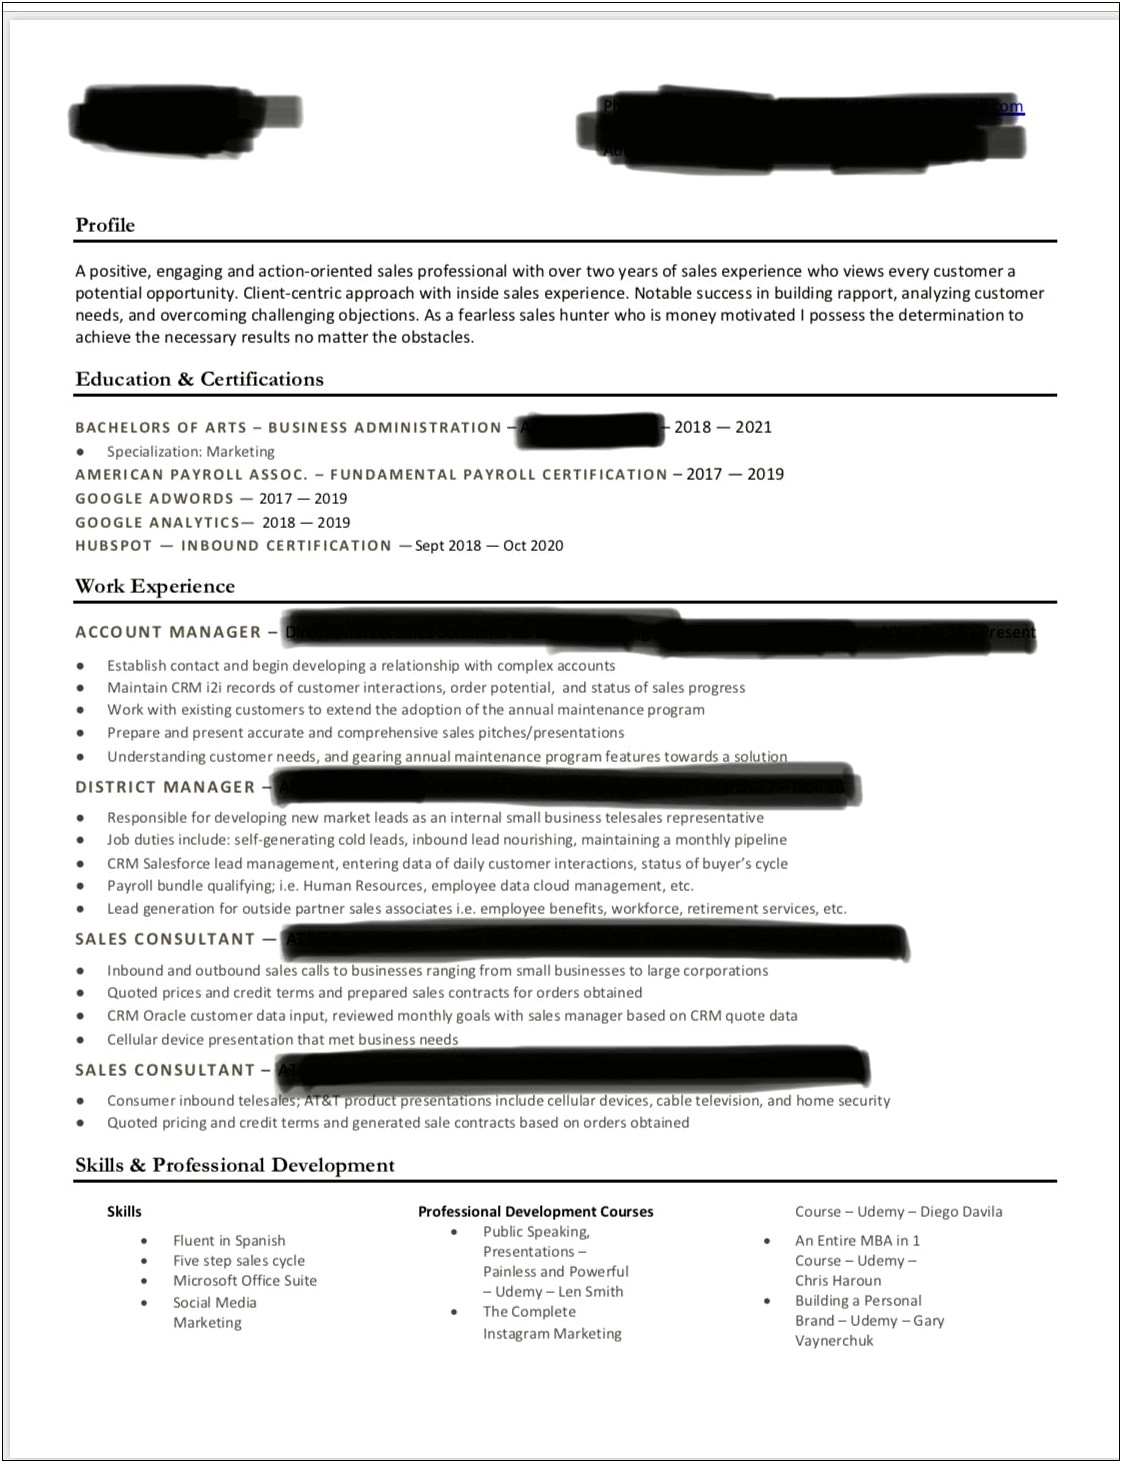 Putting In Progress Certifications On Resume